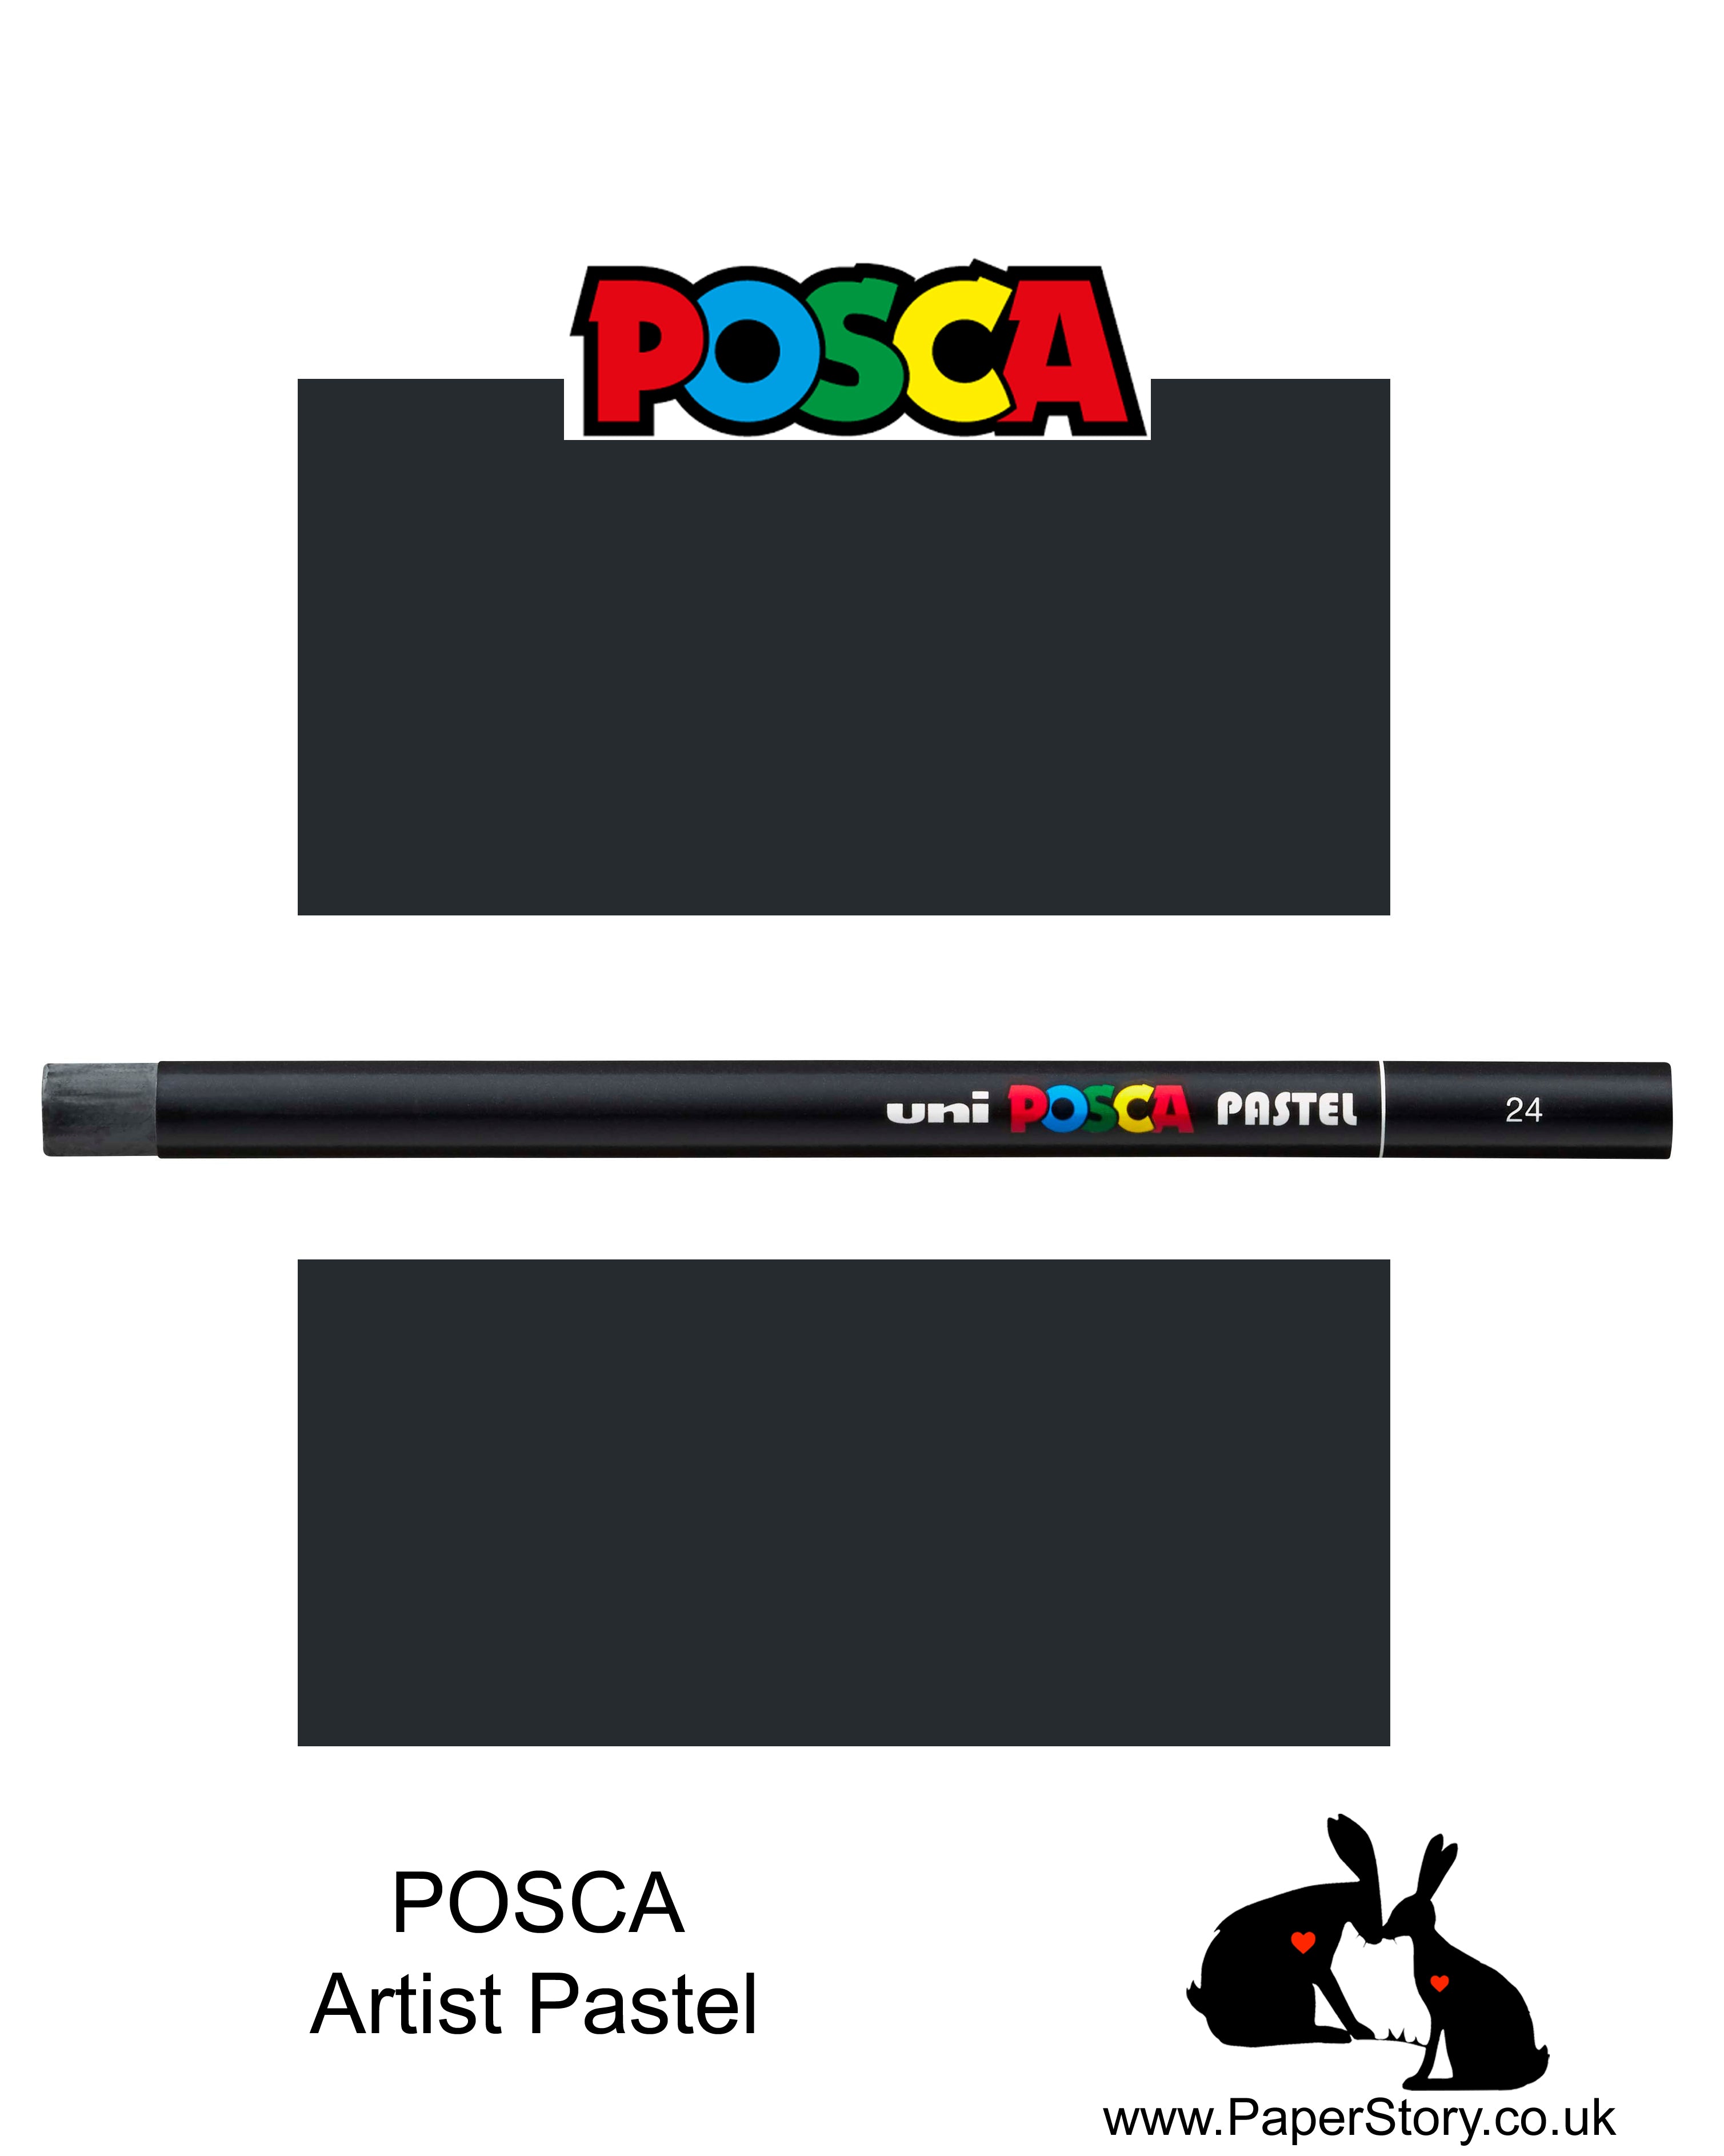 New Uni POSCA colour Pastels Black, Colours can be blended and overlaid, you can stipple, colour block, cross-hatch, scratch and outline. You can heat the sticks to create textured effects.